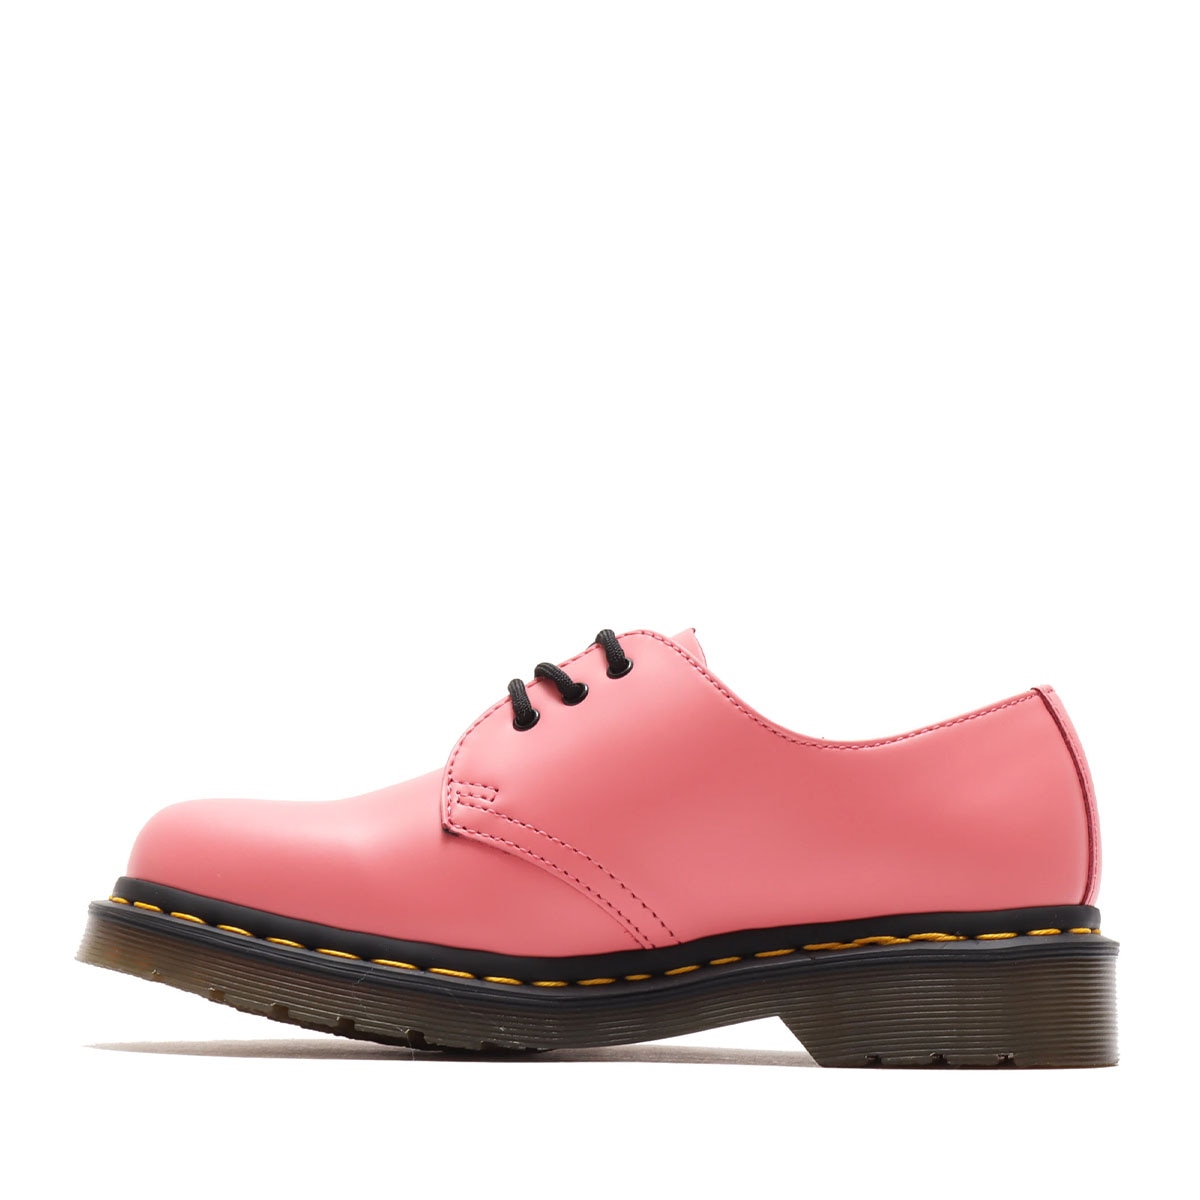 Dr.Martens Icons 1461|atmos pink(アトモ 